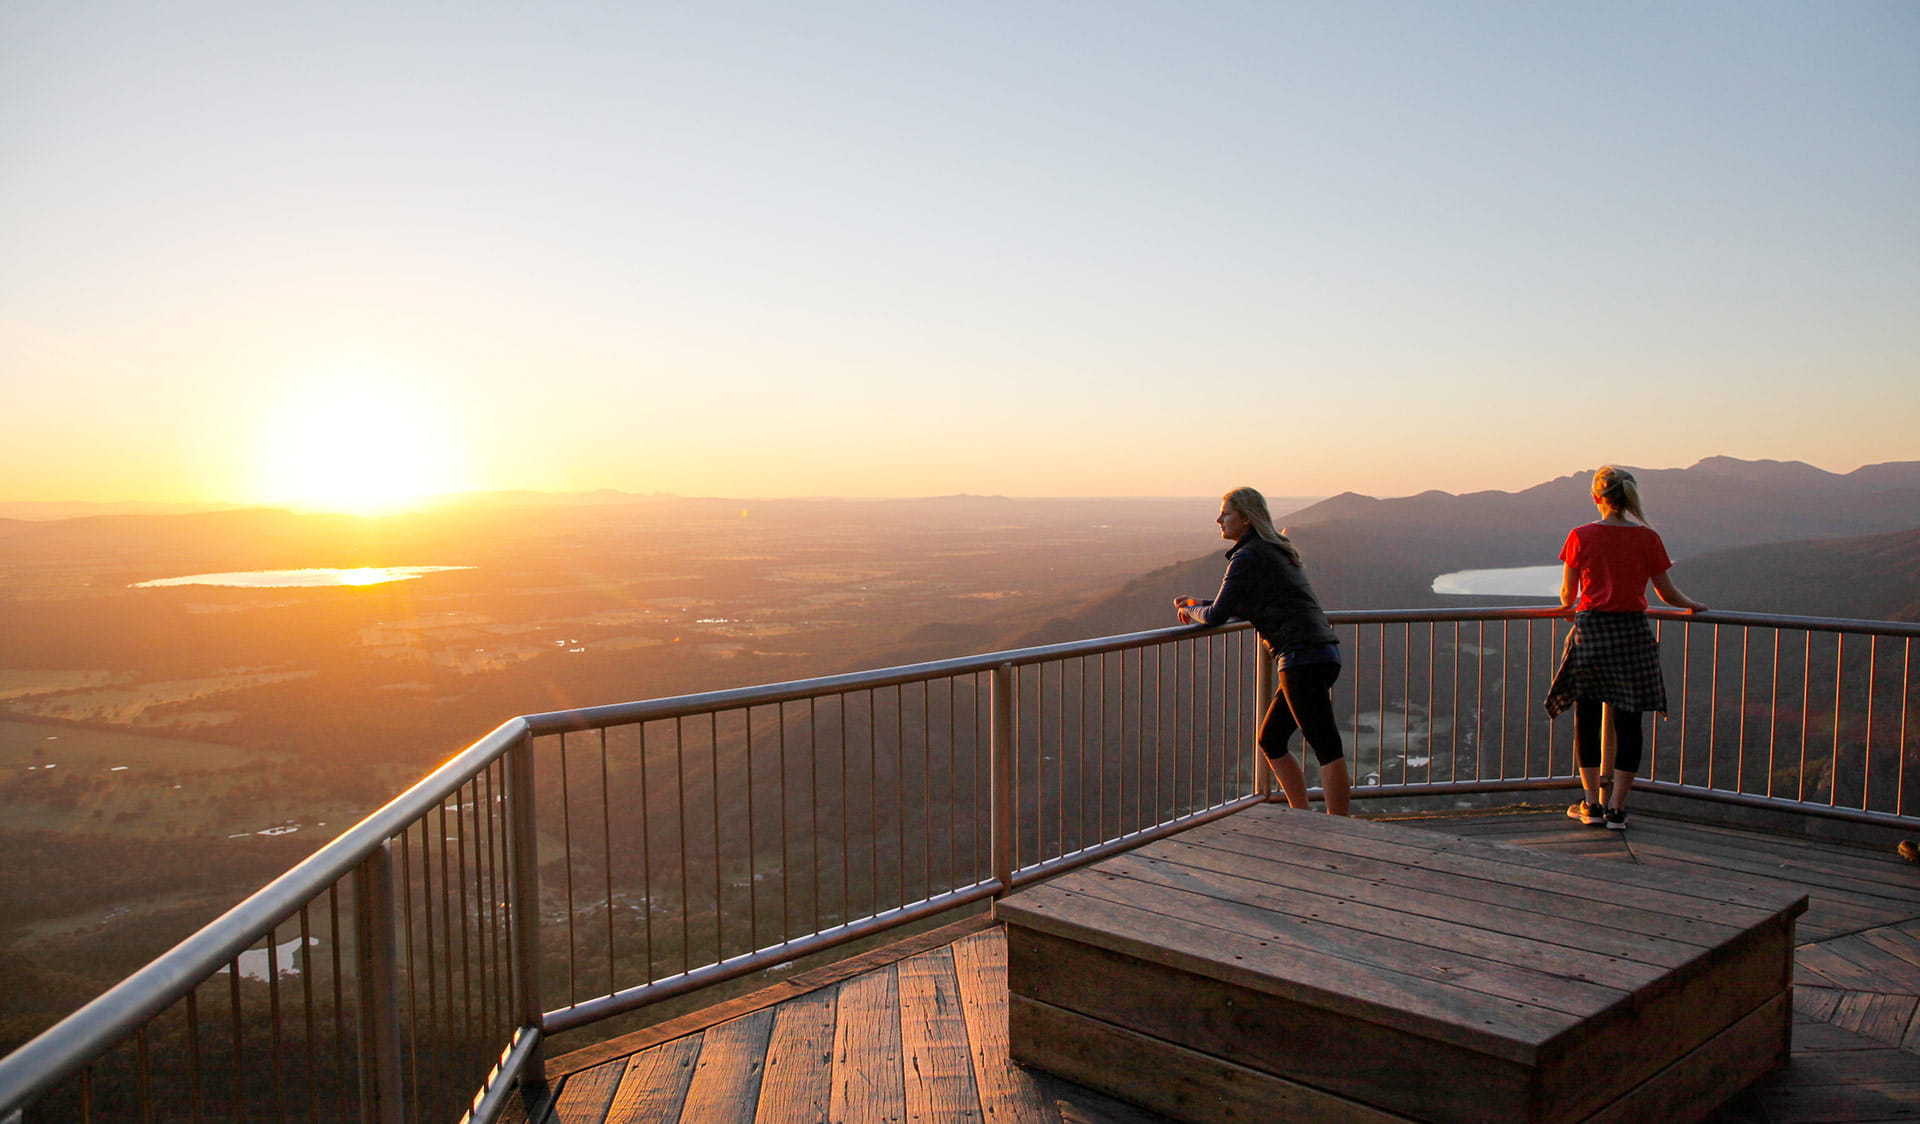 Two friends take in the view from Boroka Lookout at sunset.